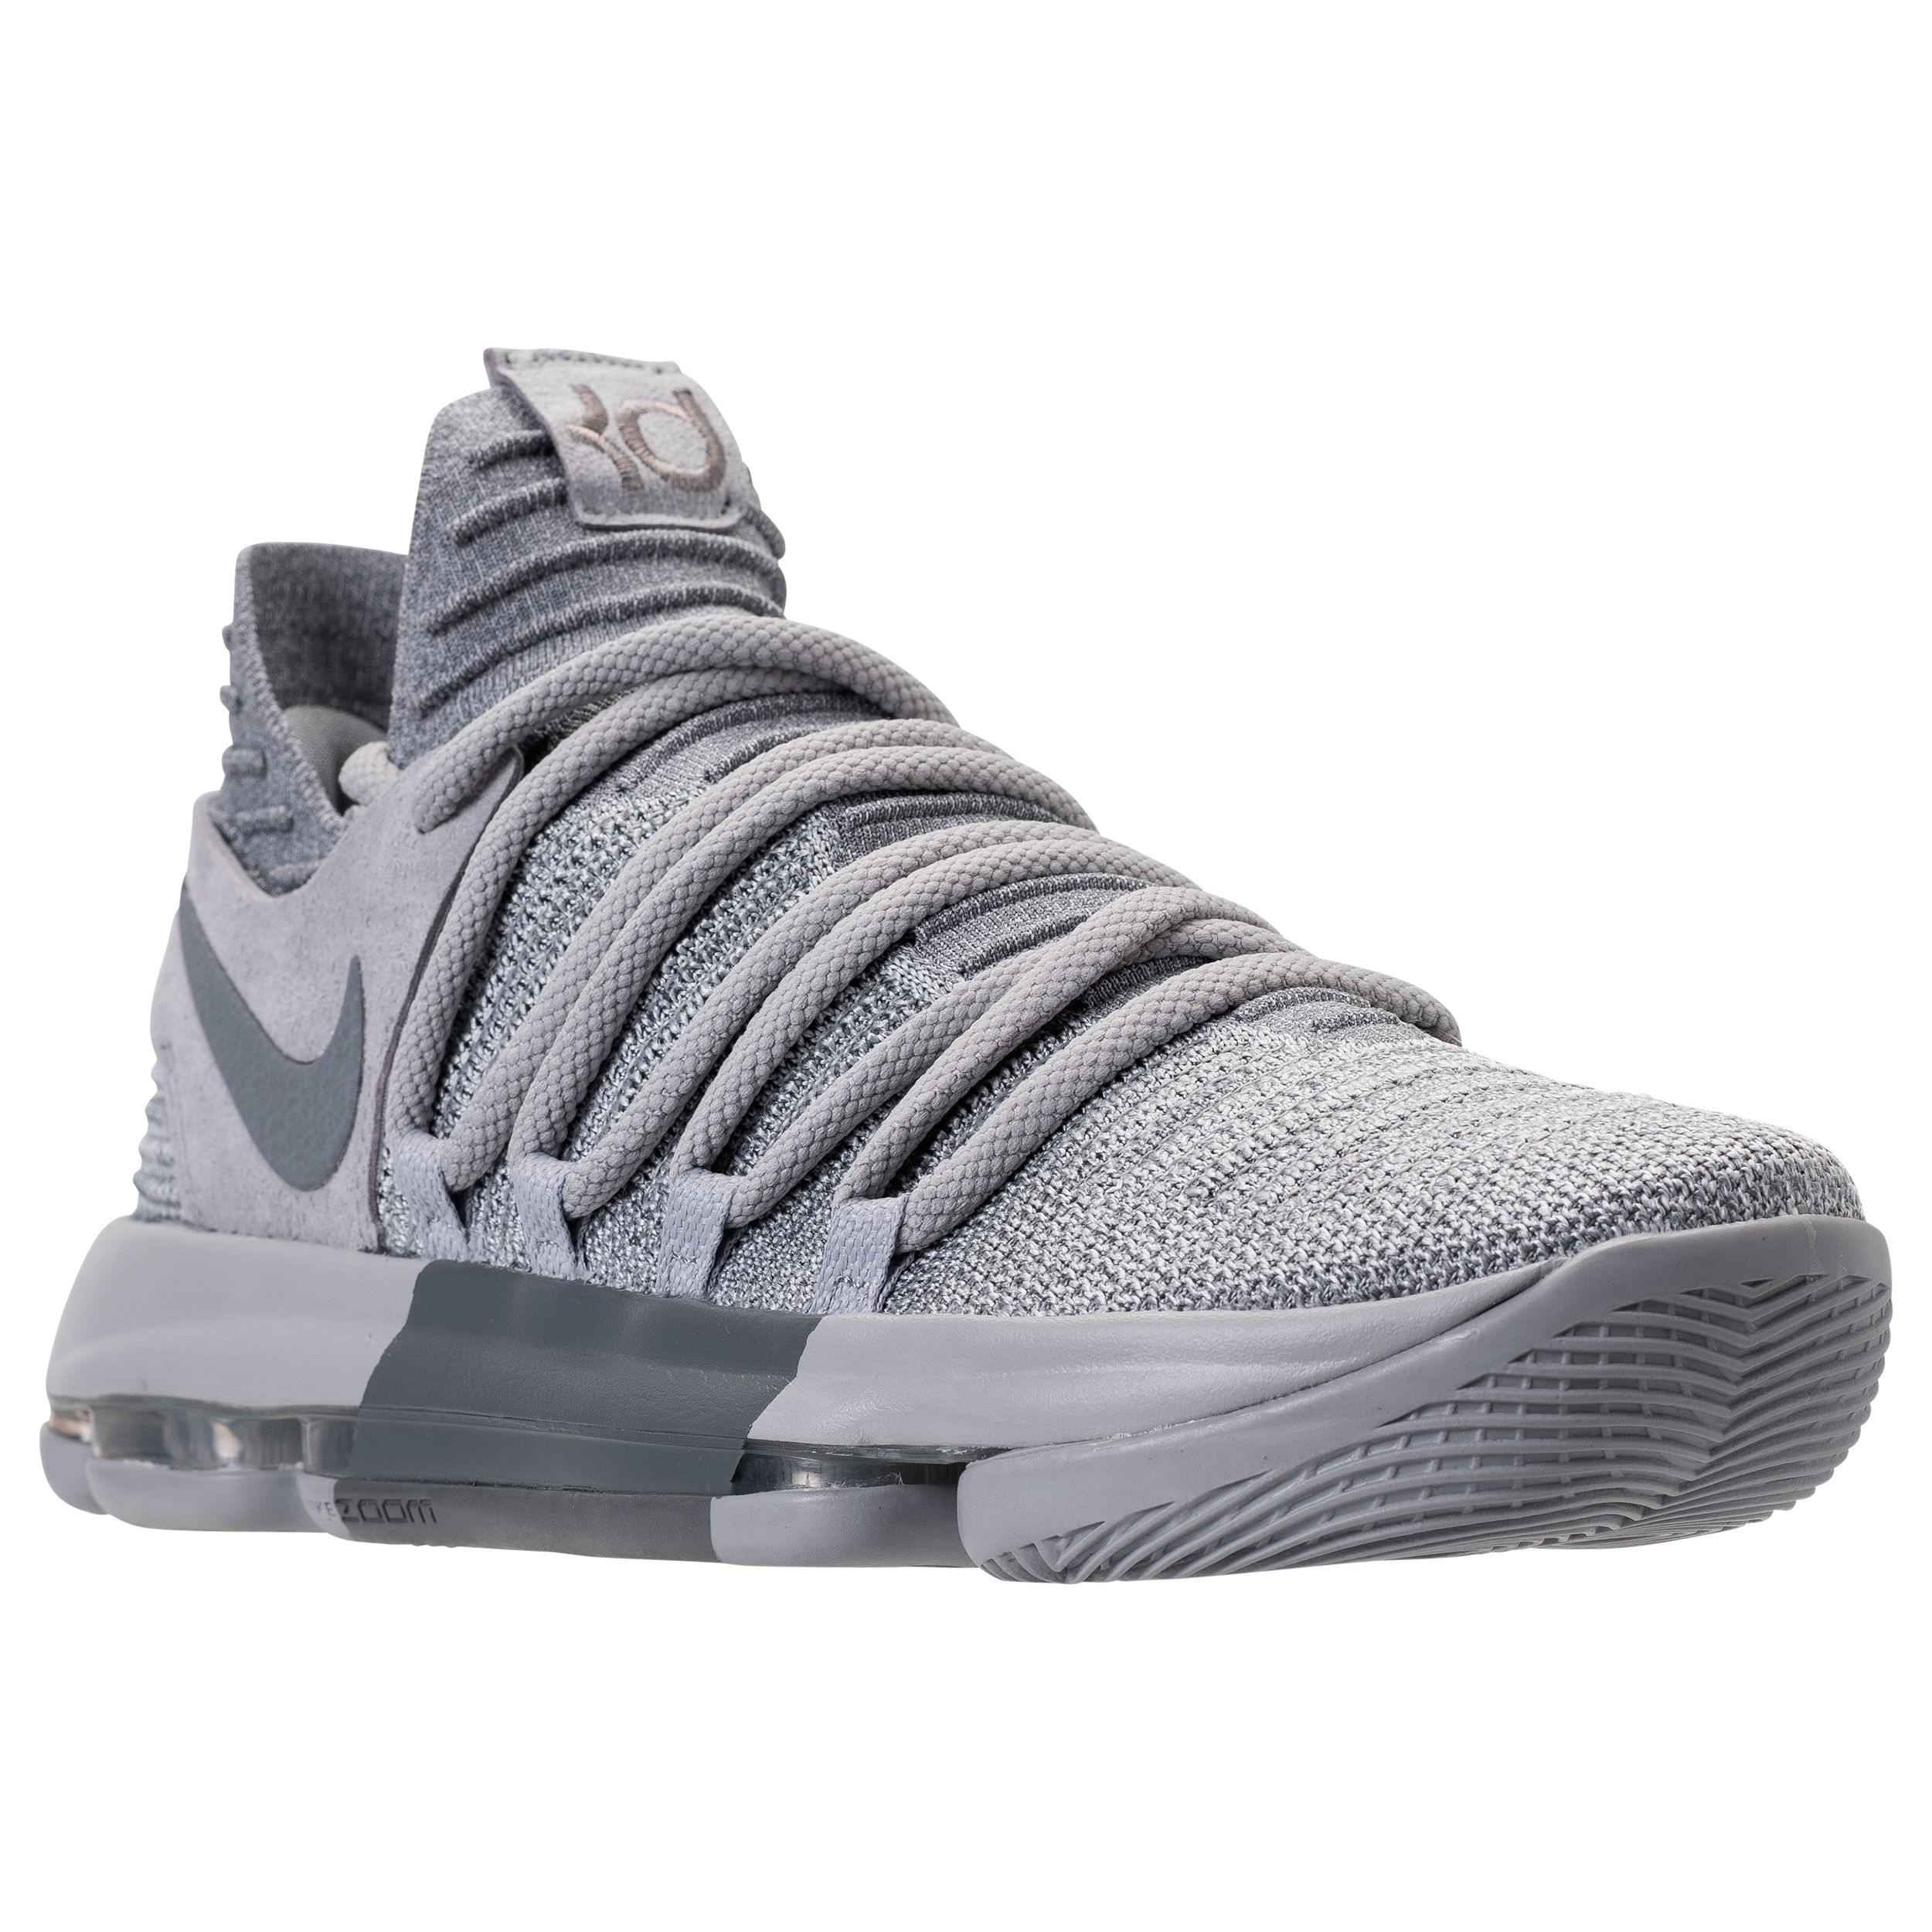 The Nike KD 10 is Going Cool Grey and 